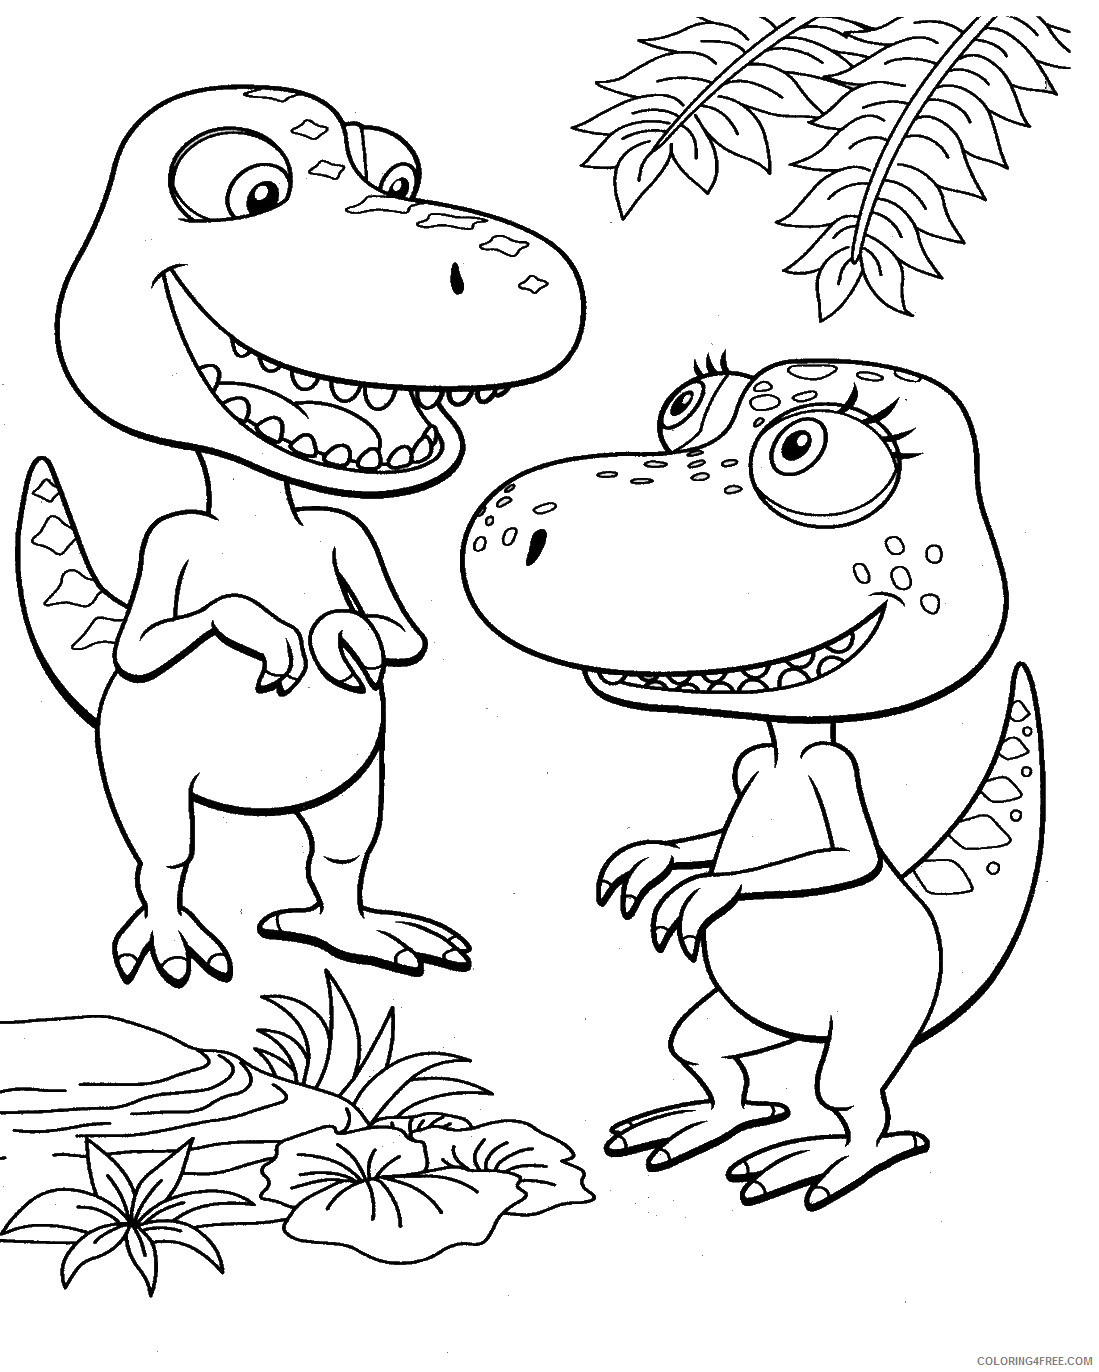 Dinosaur Train Coloring Pages Cartoons Tyrannosaurus Dinosaur Train Printable 2020 2282 Coloring4free